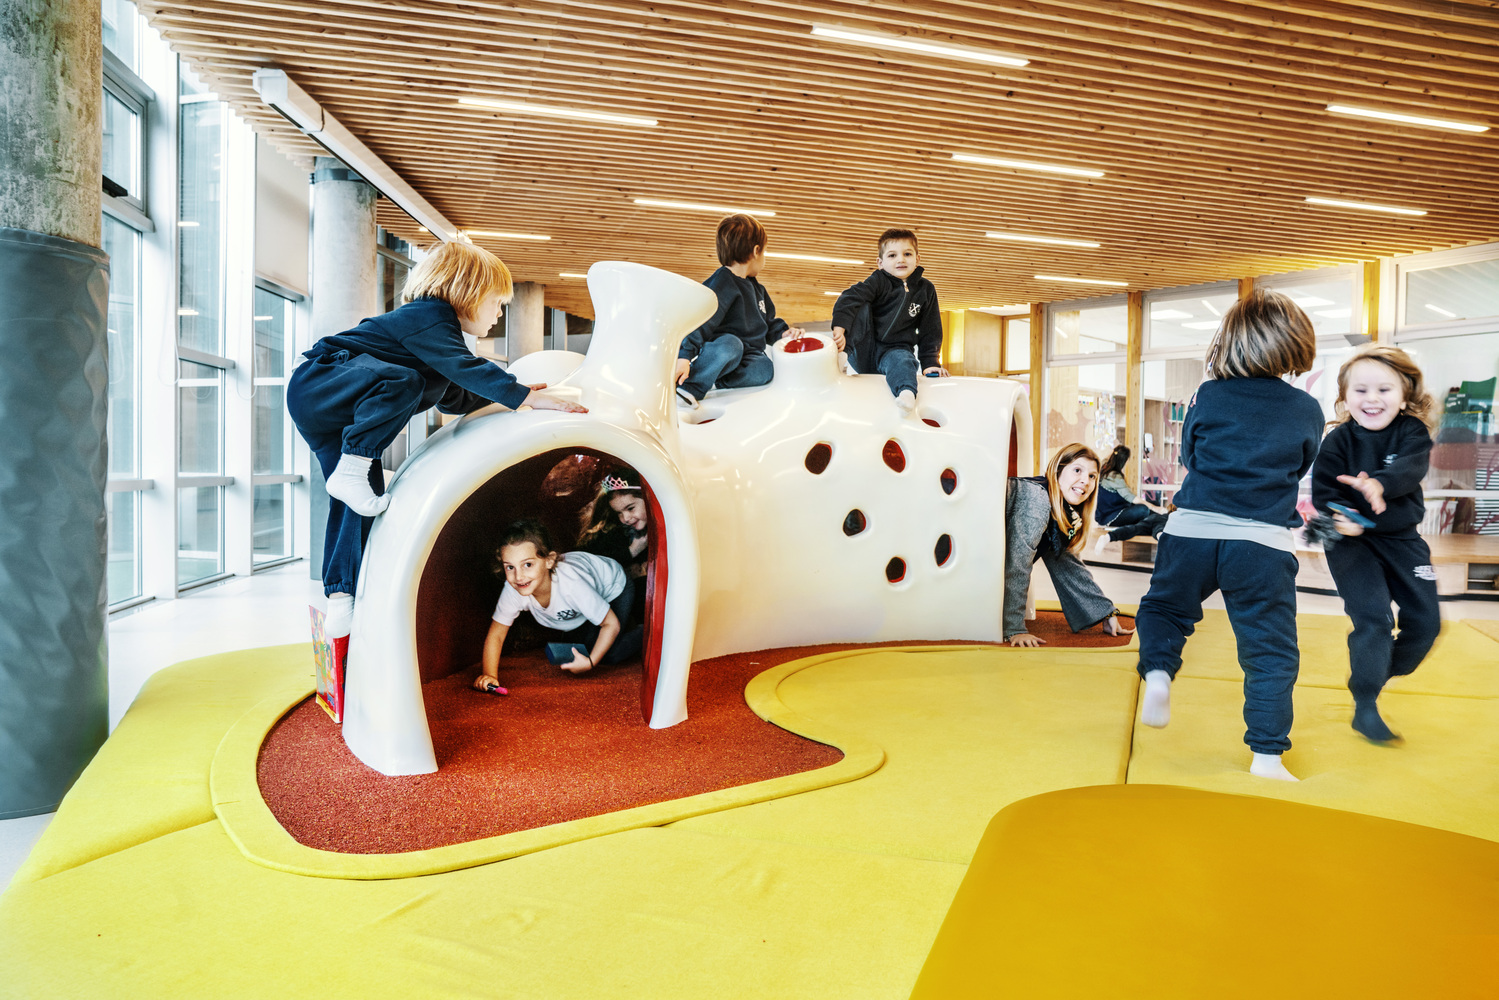 “We are used to ignoring our body”: Rosan Bosch on designing a conscious learning environment